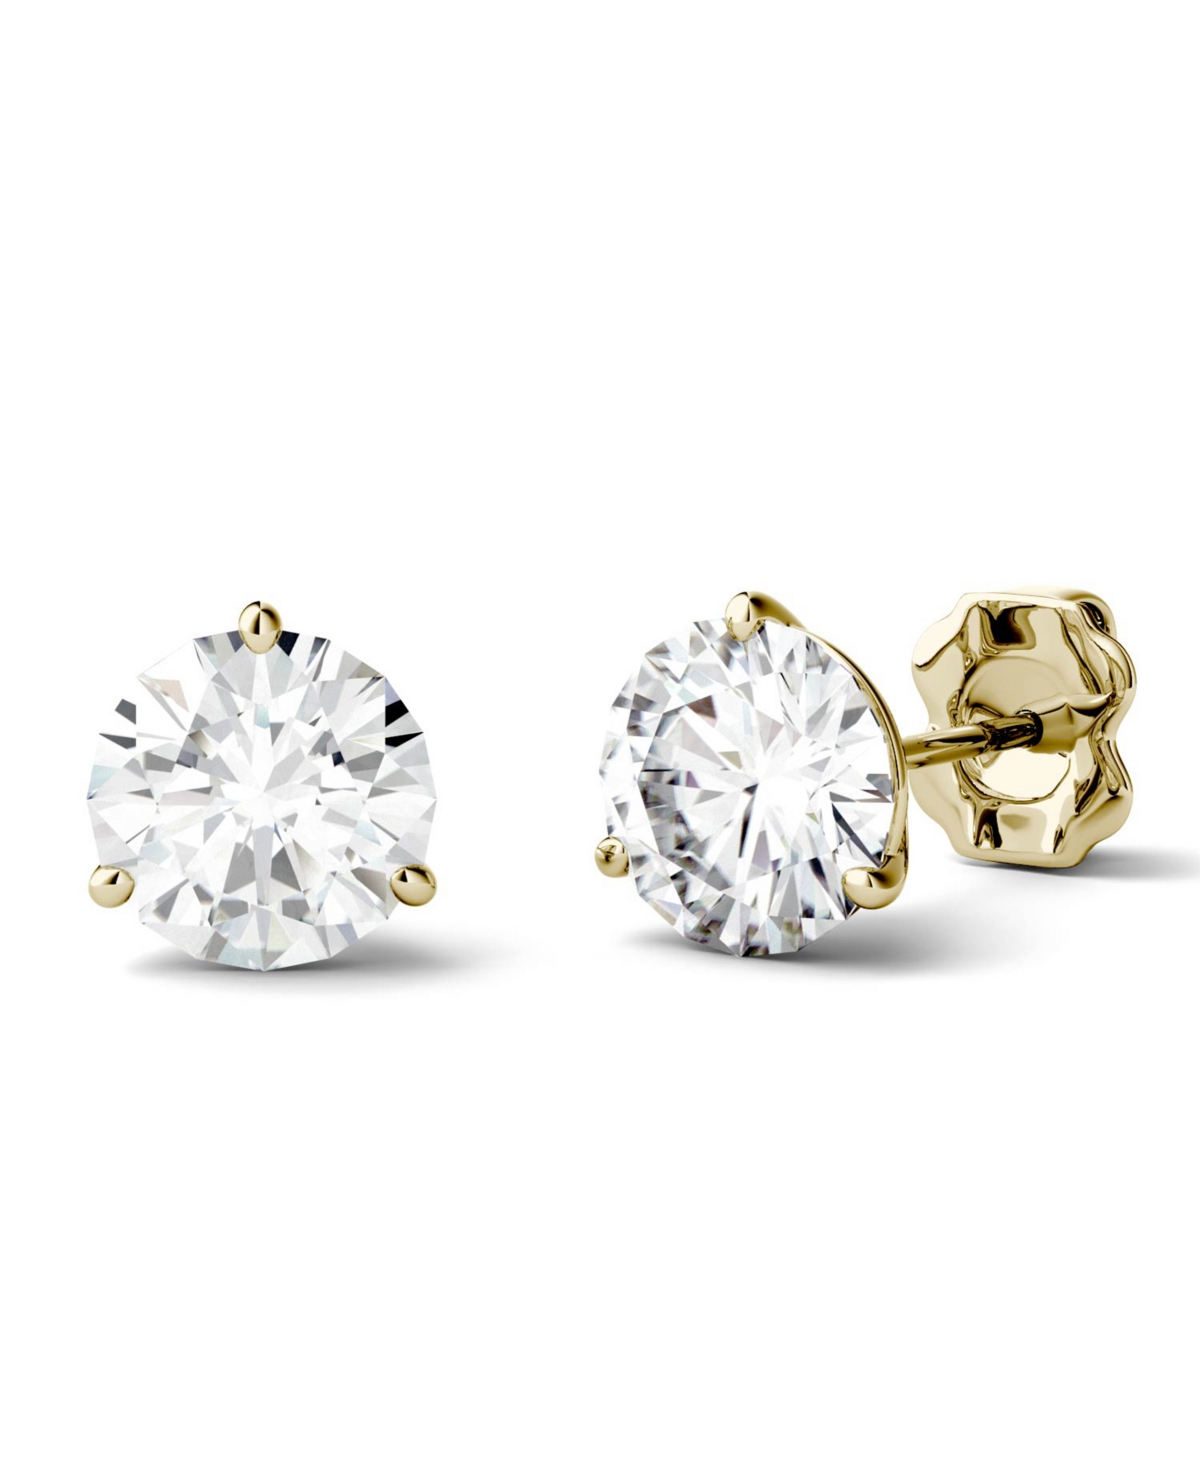 Moissanite Martini Stud Earrings (3 ct. t.w. Diamond Equivalent) in 14k white or yellow gold - Gold